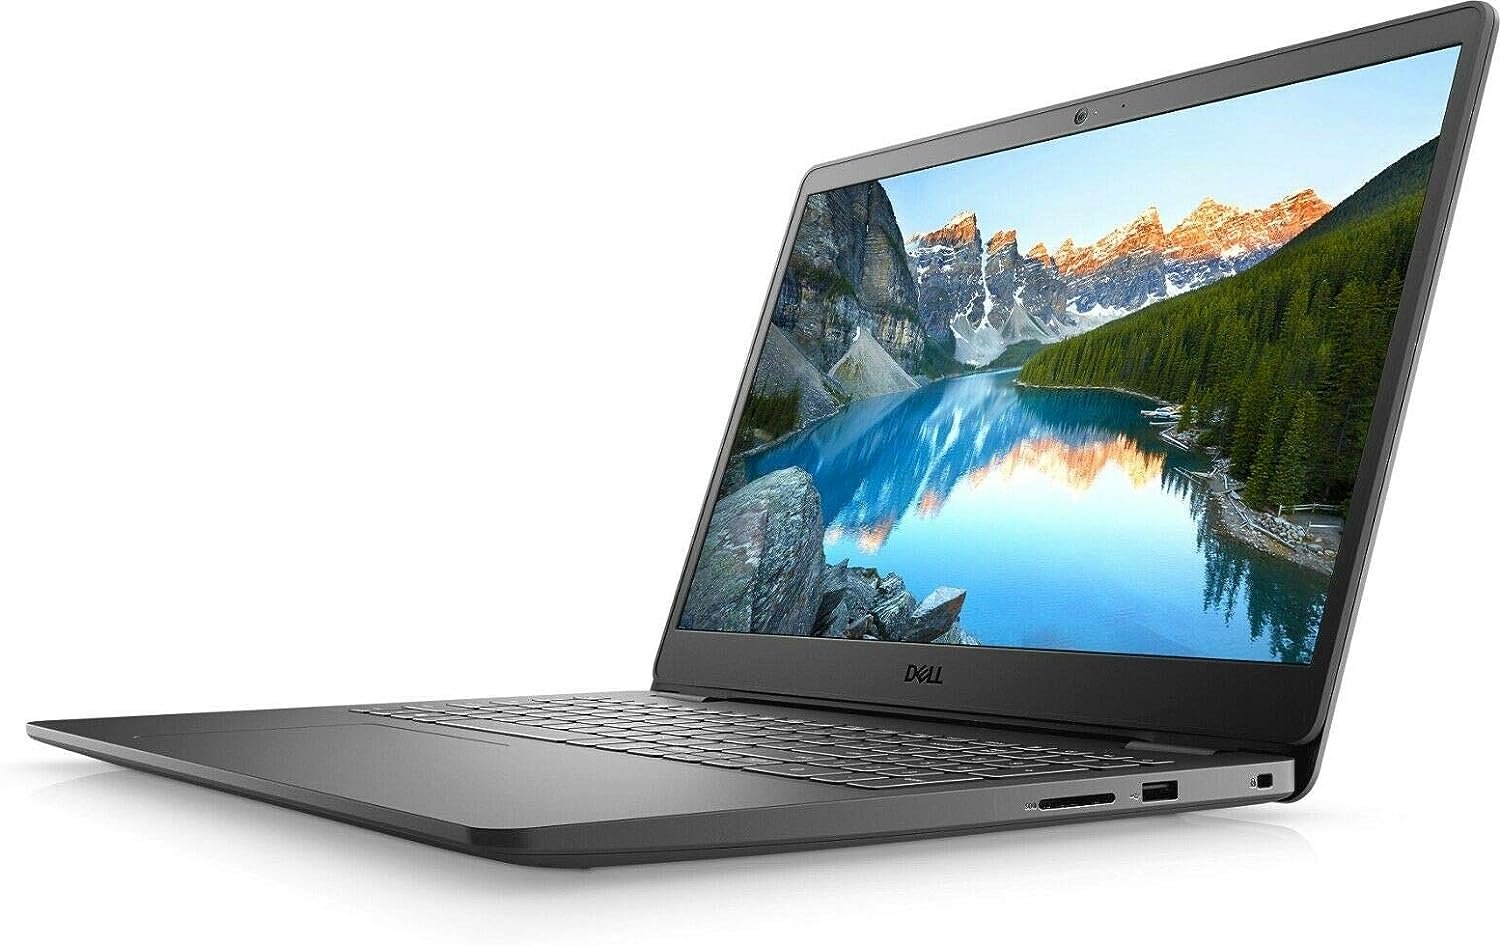 Dell Inspiron 15 3000 3505 15.6" FHD Laptop